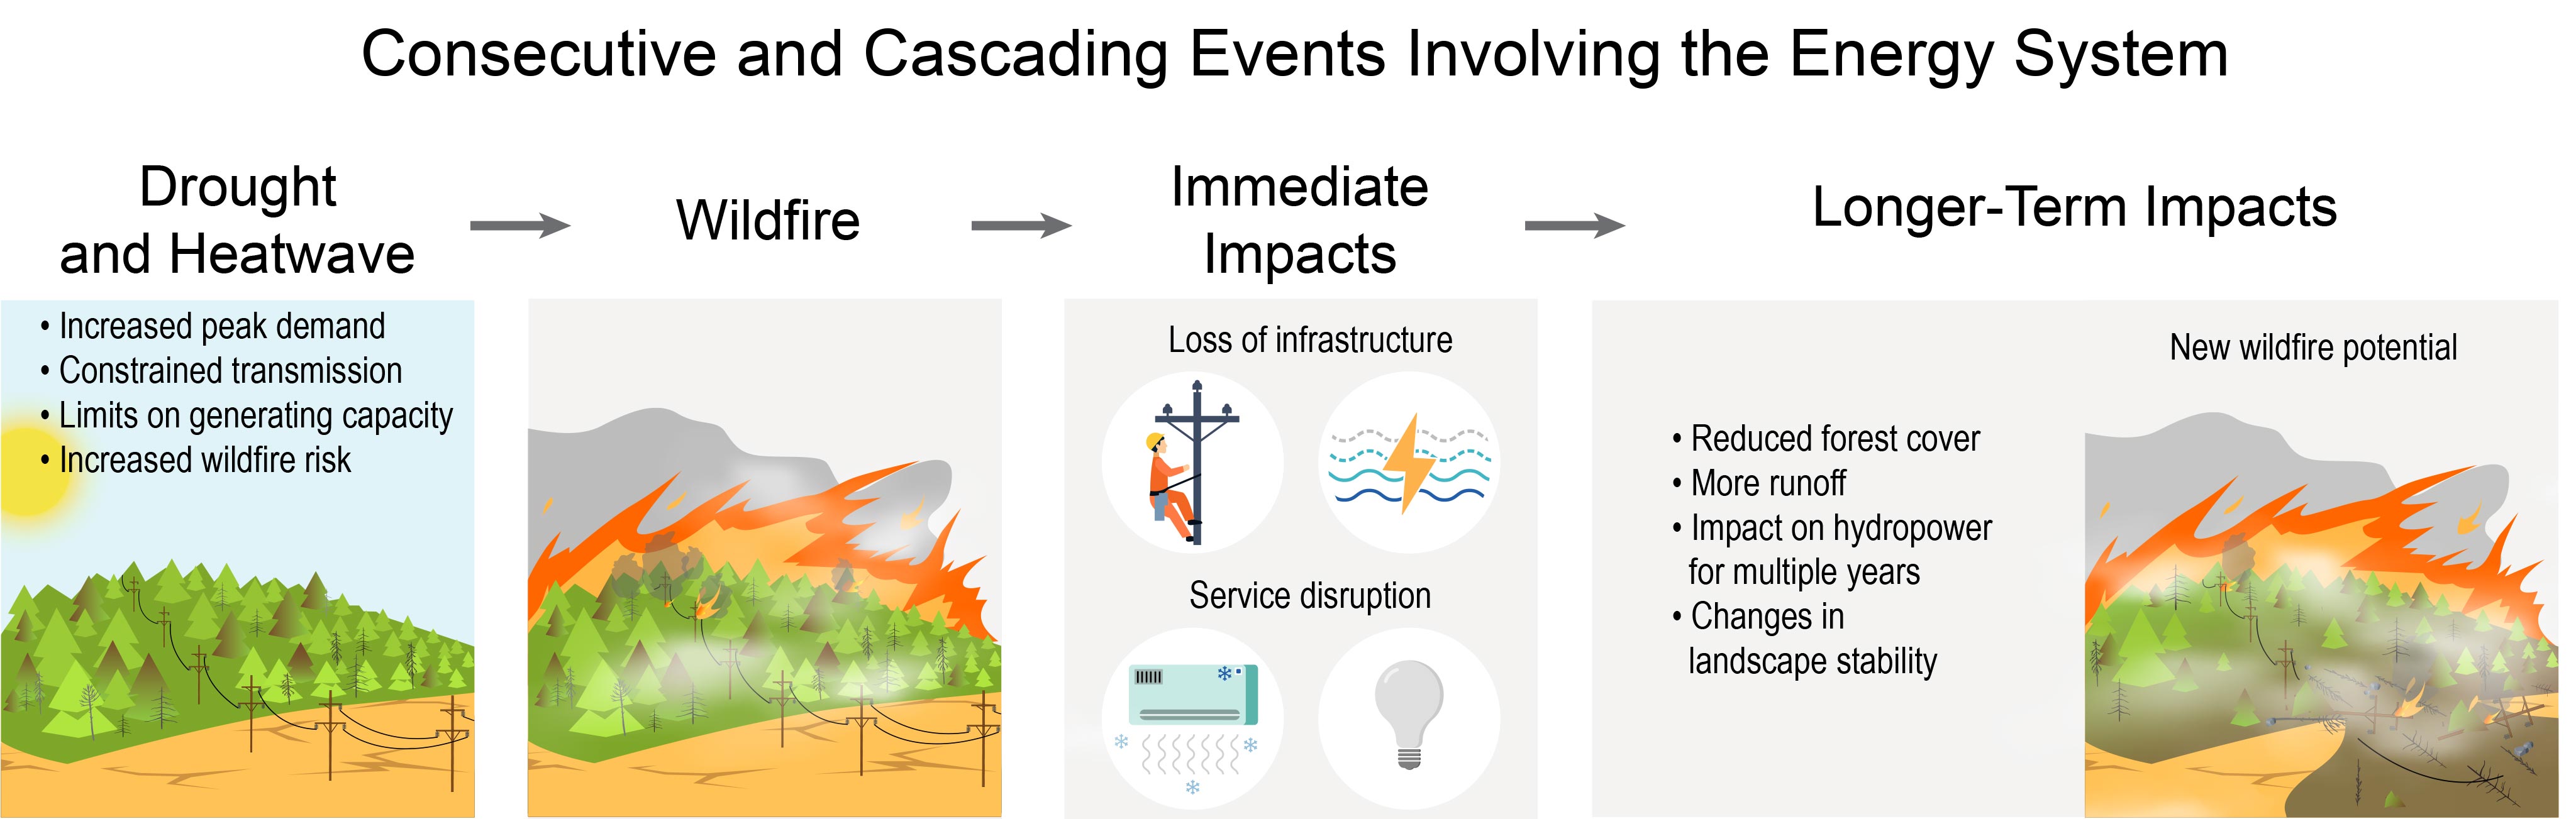 Consecutive and Cascading Events Involving the Energy System